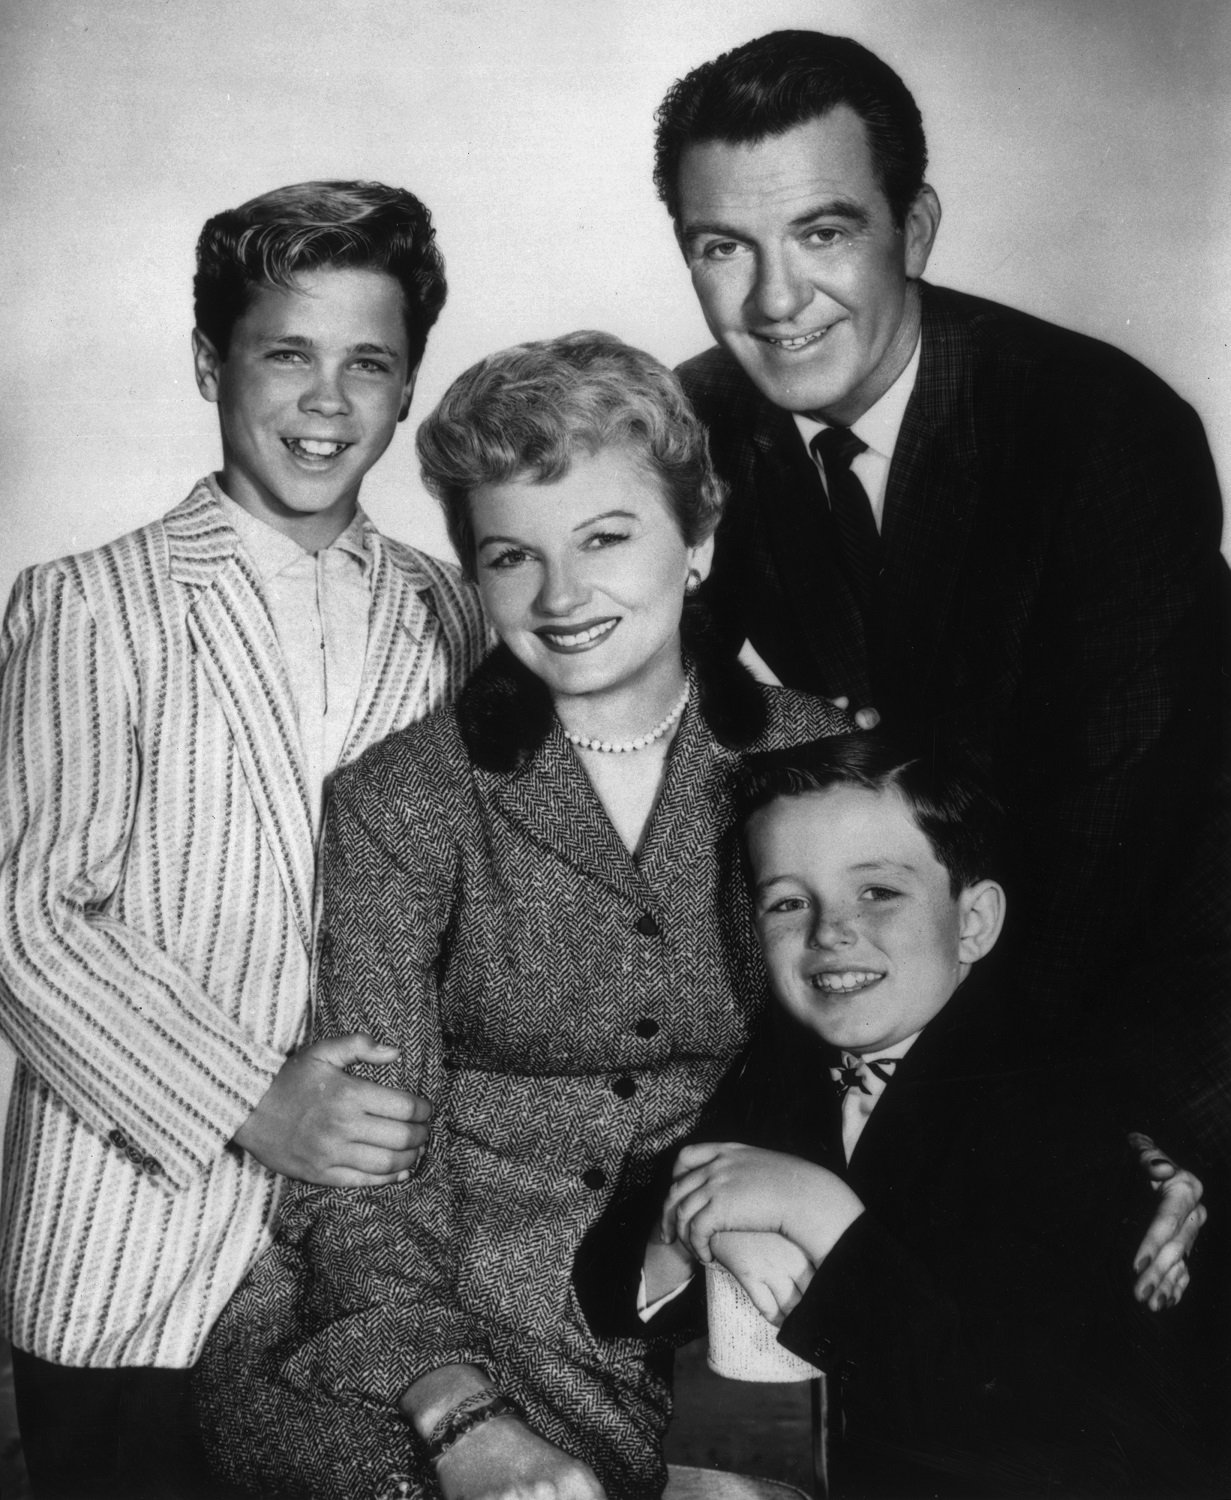 Tony Dow, Hugh Beaumont,  Jerry Mathers, and Barbara Billingsley pose together in a promotional portrait for 'Leave It to Beaver'